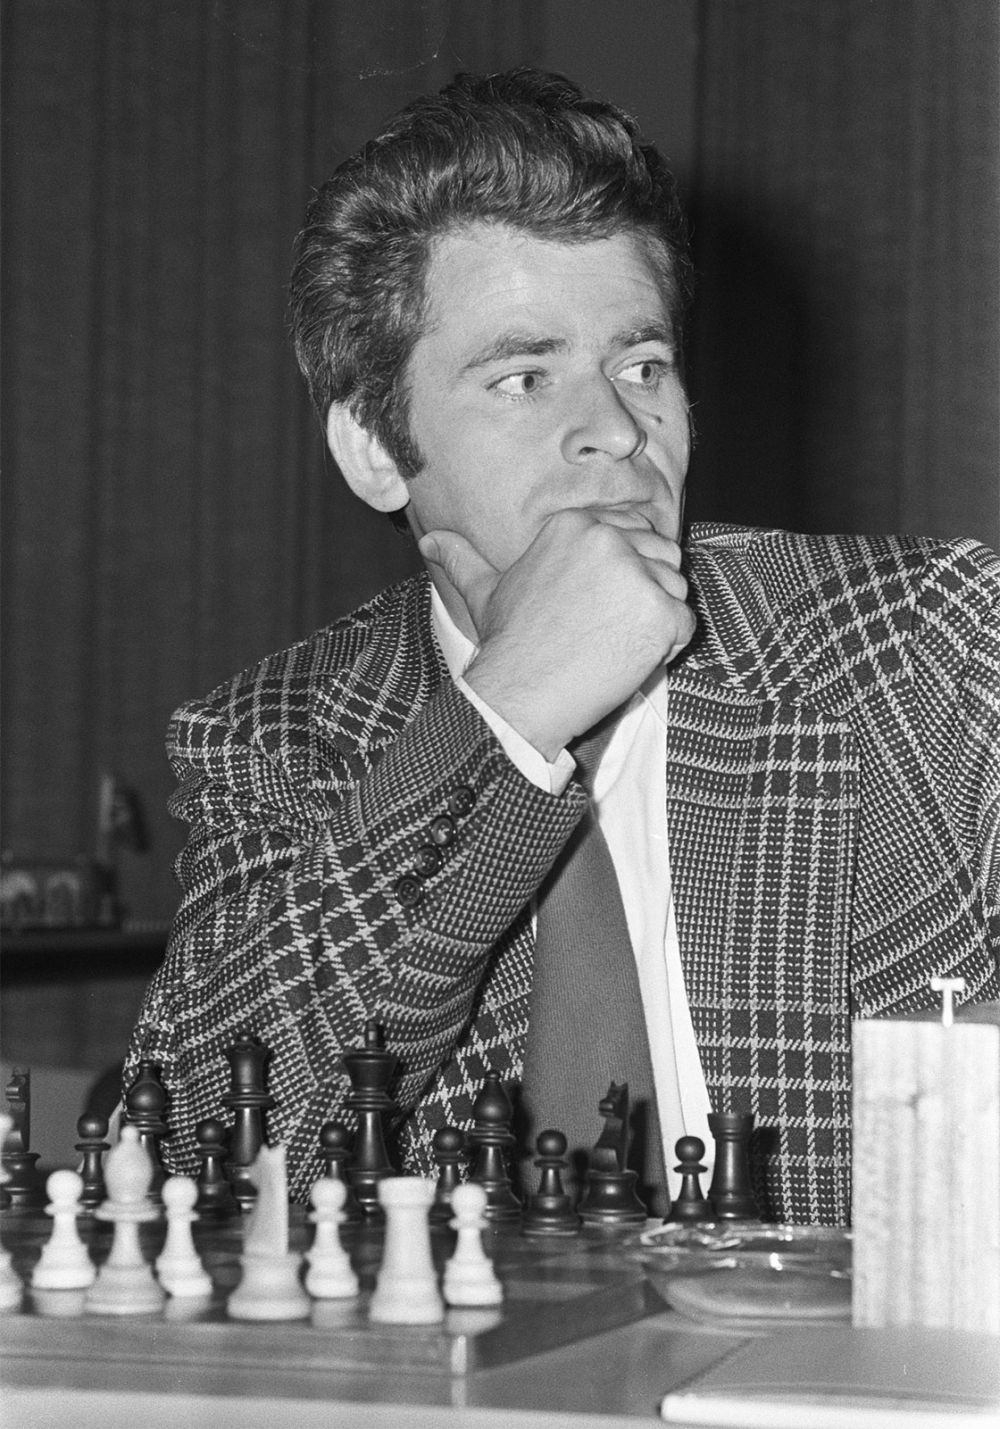 Susan Polgar - The chess legend Boris Spassky turns 86 today! I have always  enjoyed our many encounters and conversations, on and off the chess board.  He is a true gentleman of